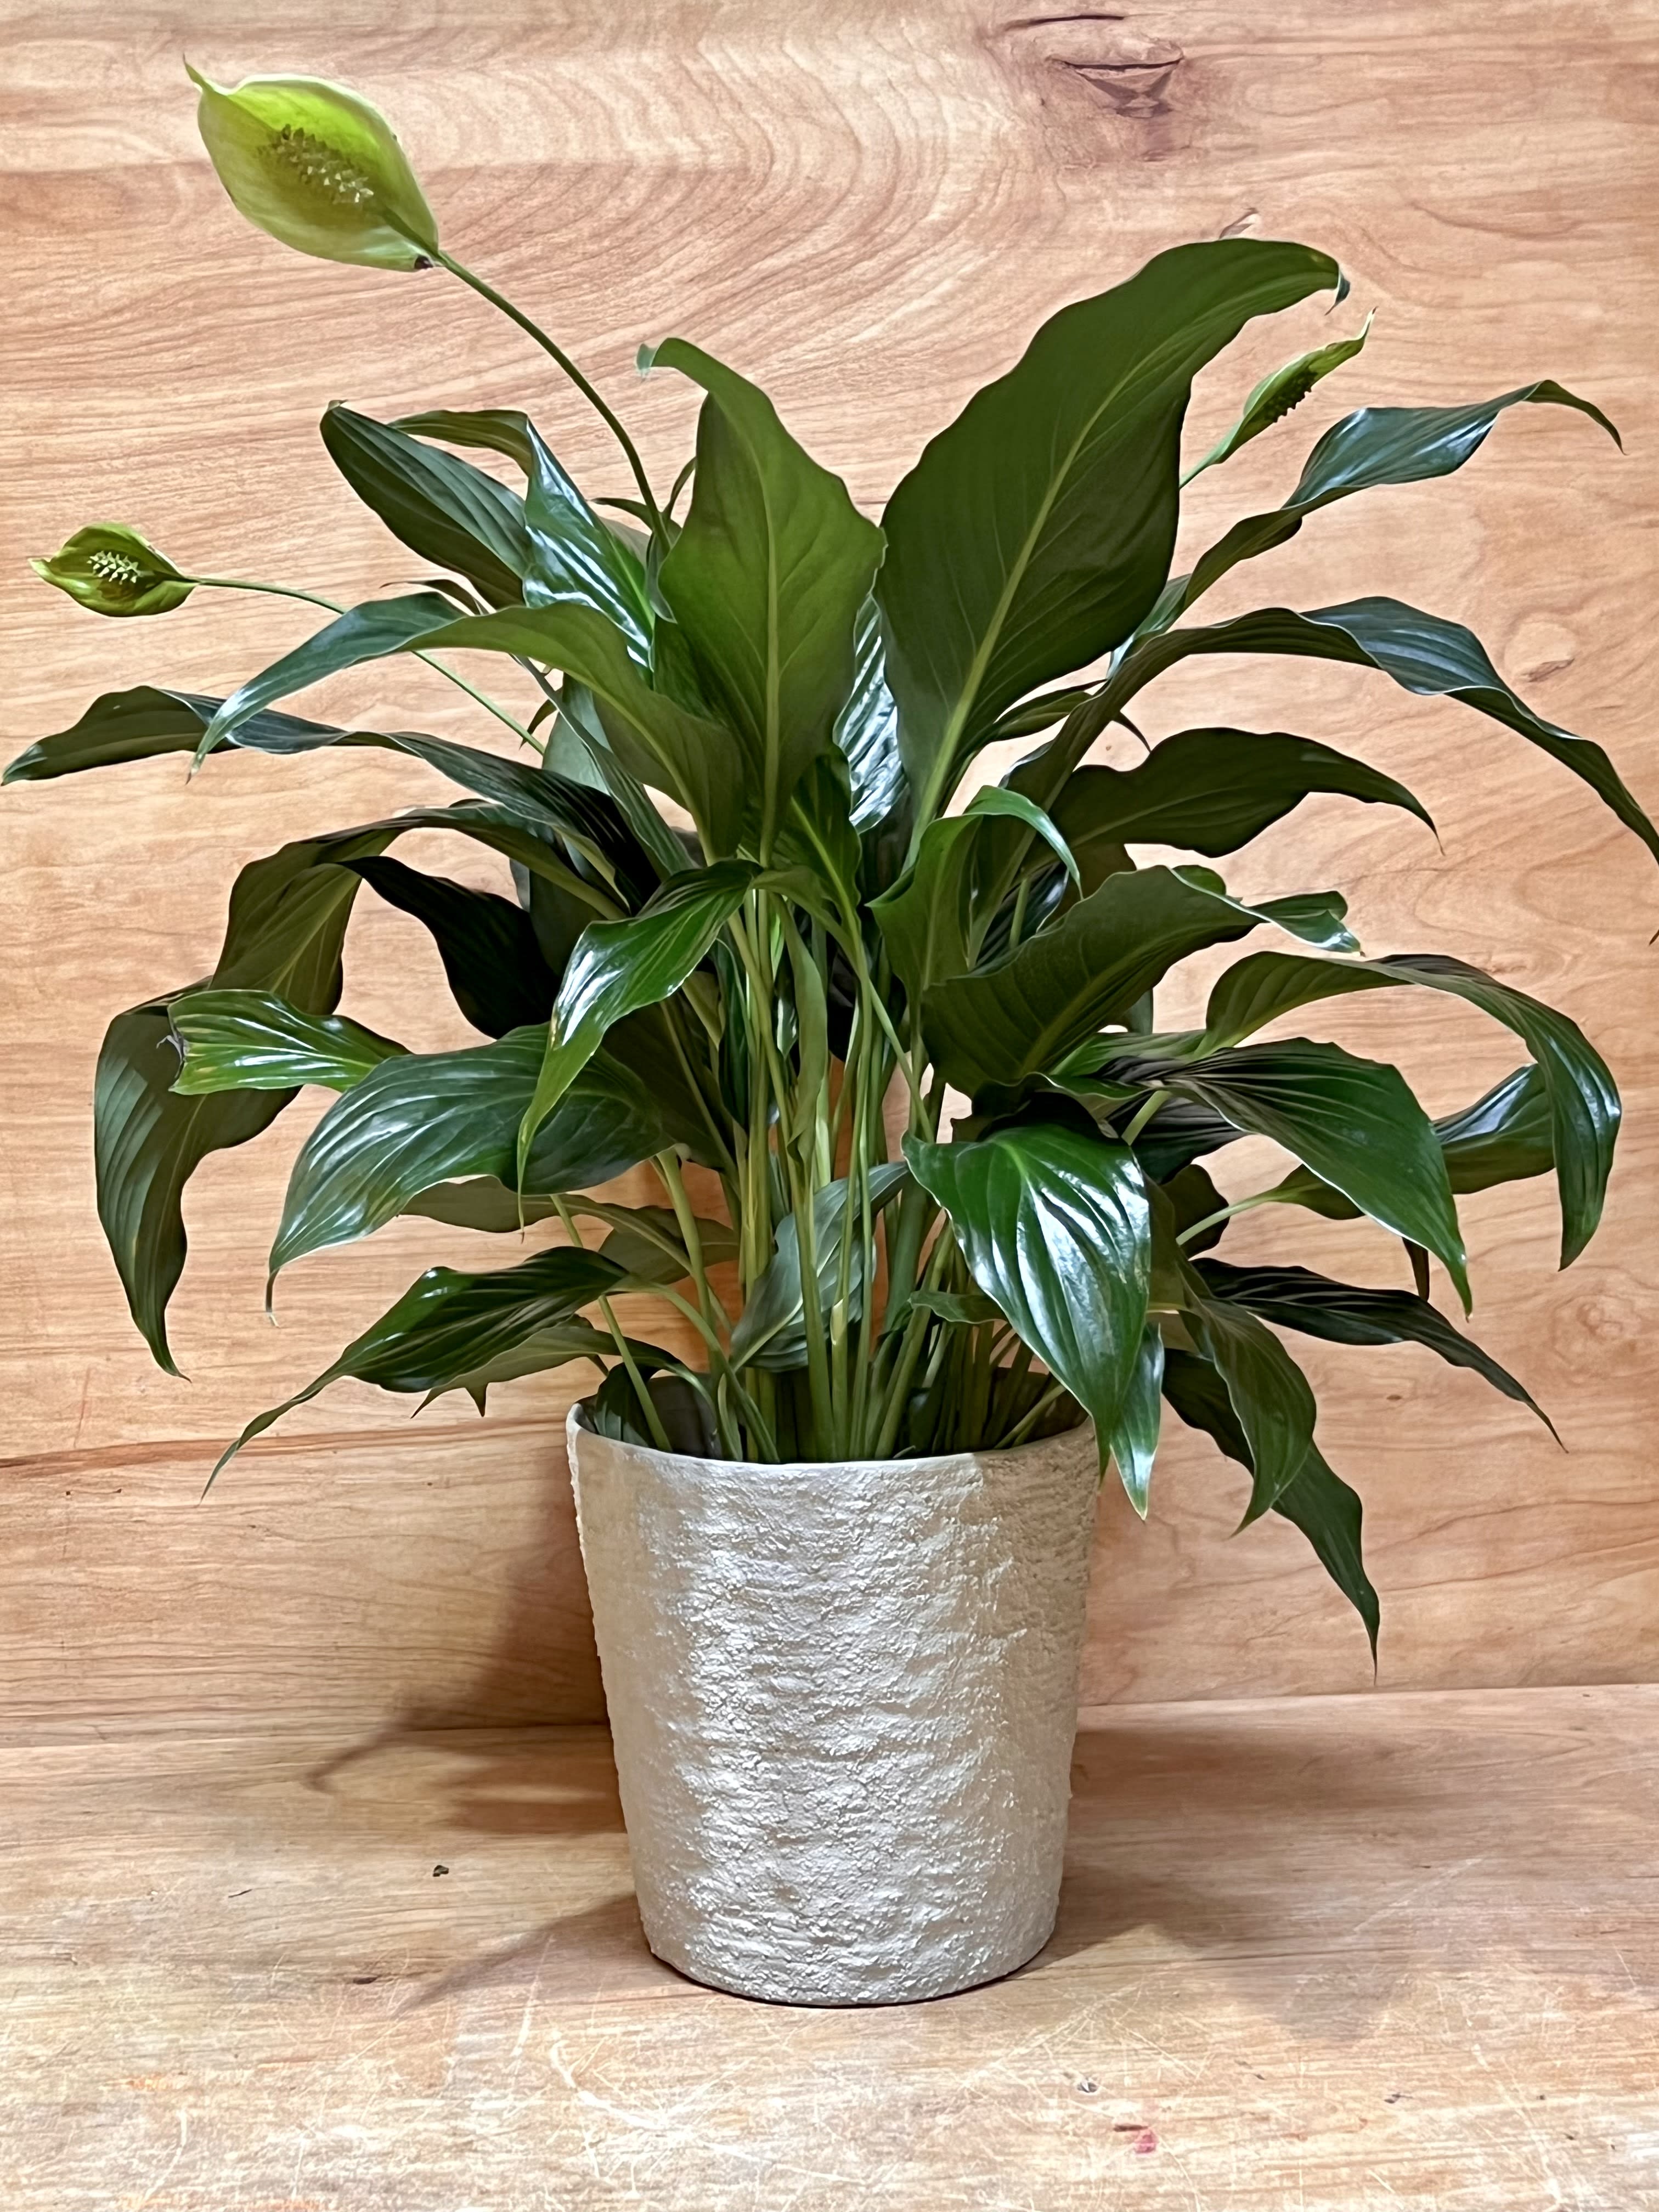 Peace Lilly Plant in Ceramic Container - Peace Lilly Plant in Ceramic Container. Peace lily is an easy-care plant that tolerates low light, low humidity, and still blooms consistently. Its glossy lance-shape leaves arch gracefully from a central clump of stems. The white flowers are most common in summer, but may occur any time of year. As they age they turn green. 